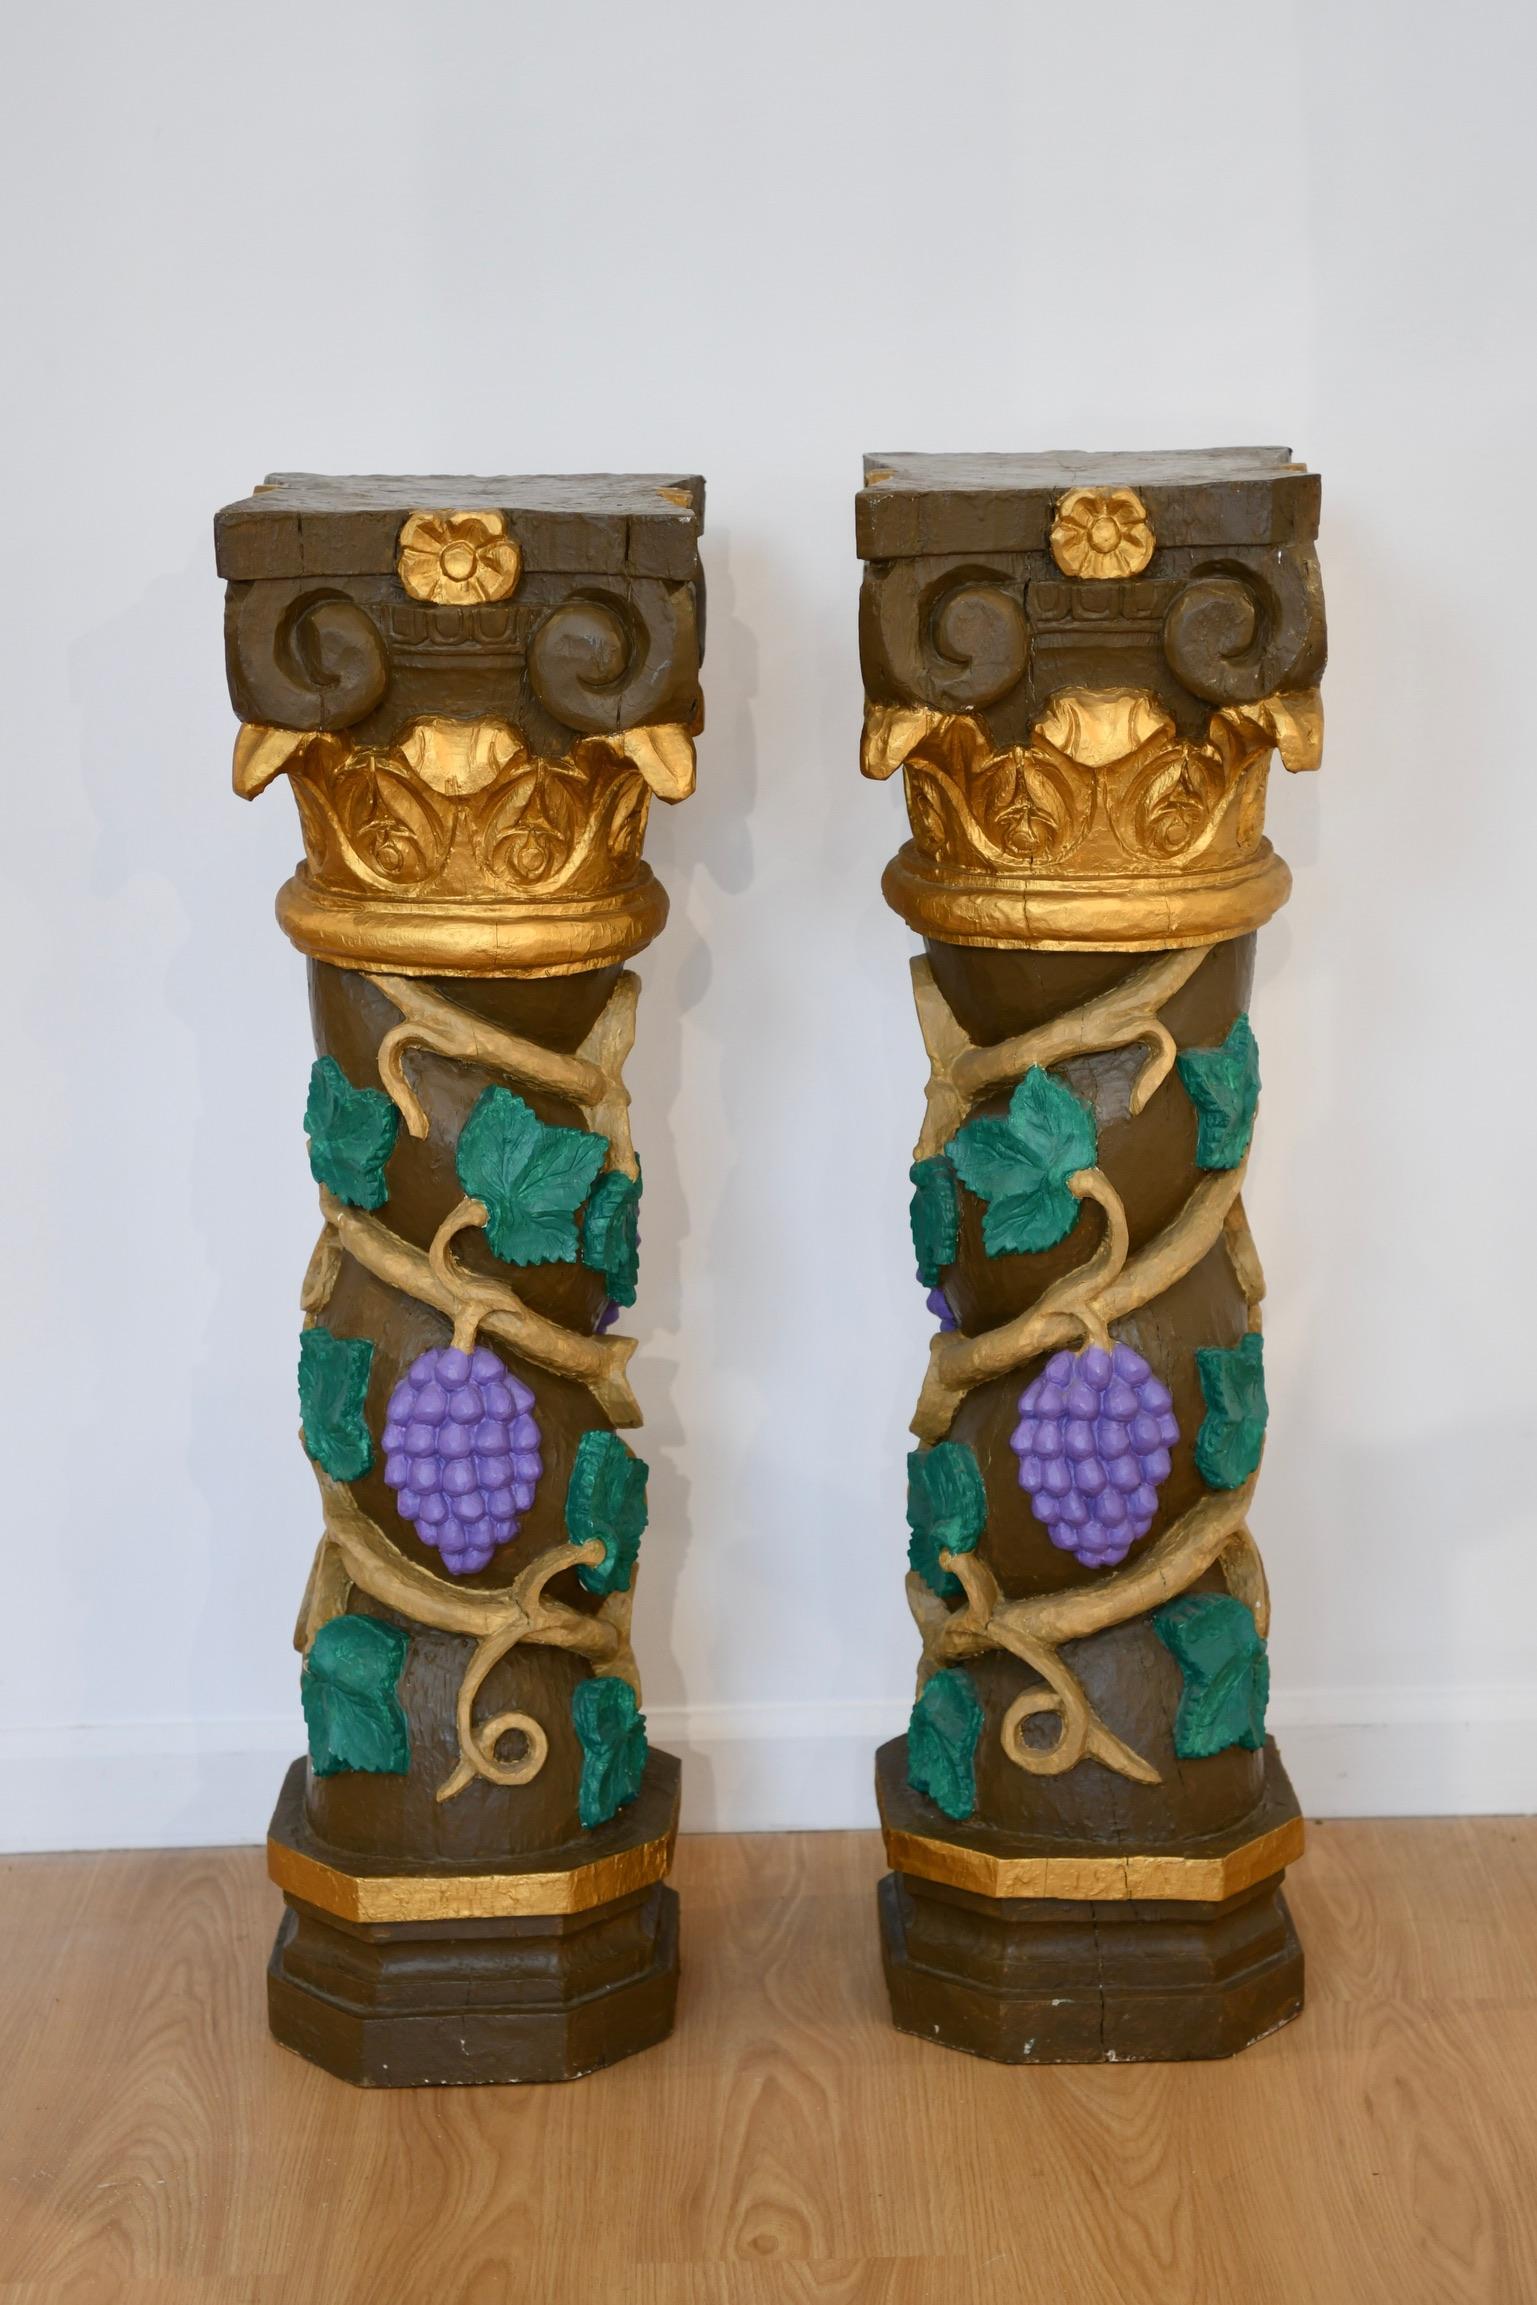 Vintage carved and painted pedestals with grape and vine motif. Sold as pair. Dimensions: 36